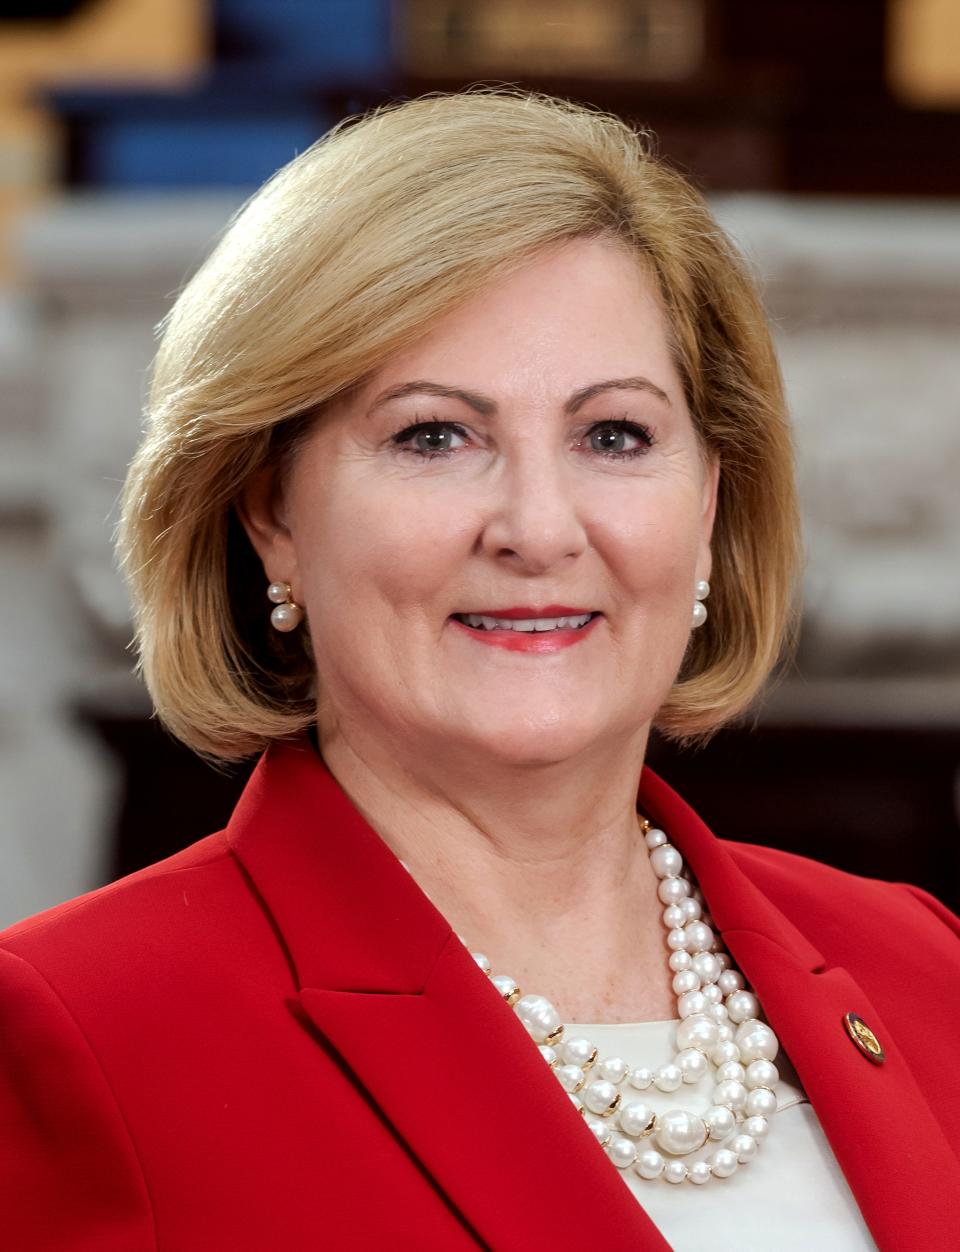 Teresa Fedor is a member of the Ohio Senate, representing the 11th district since 2019.